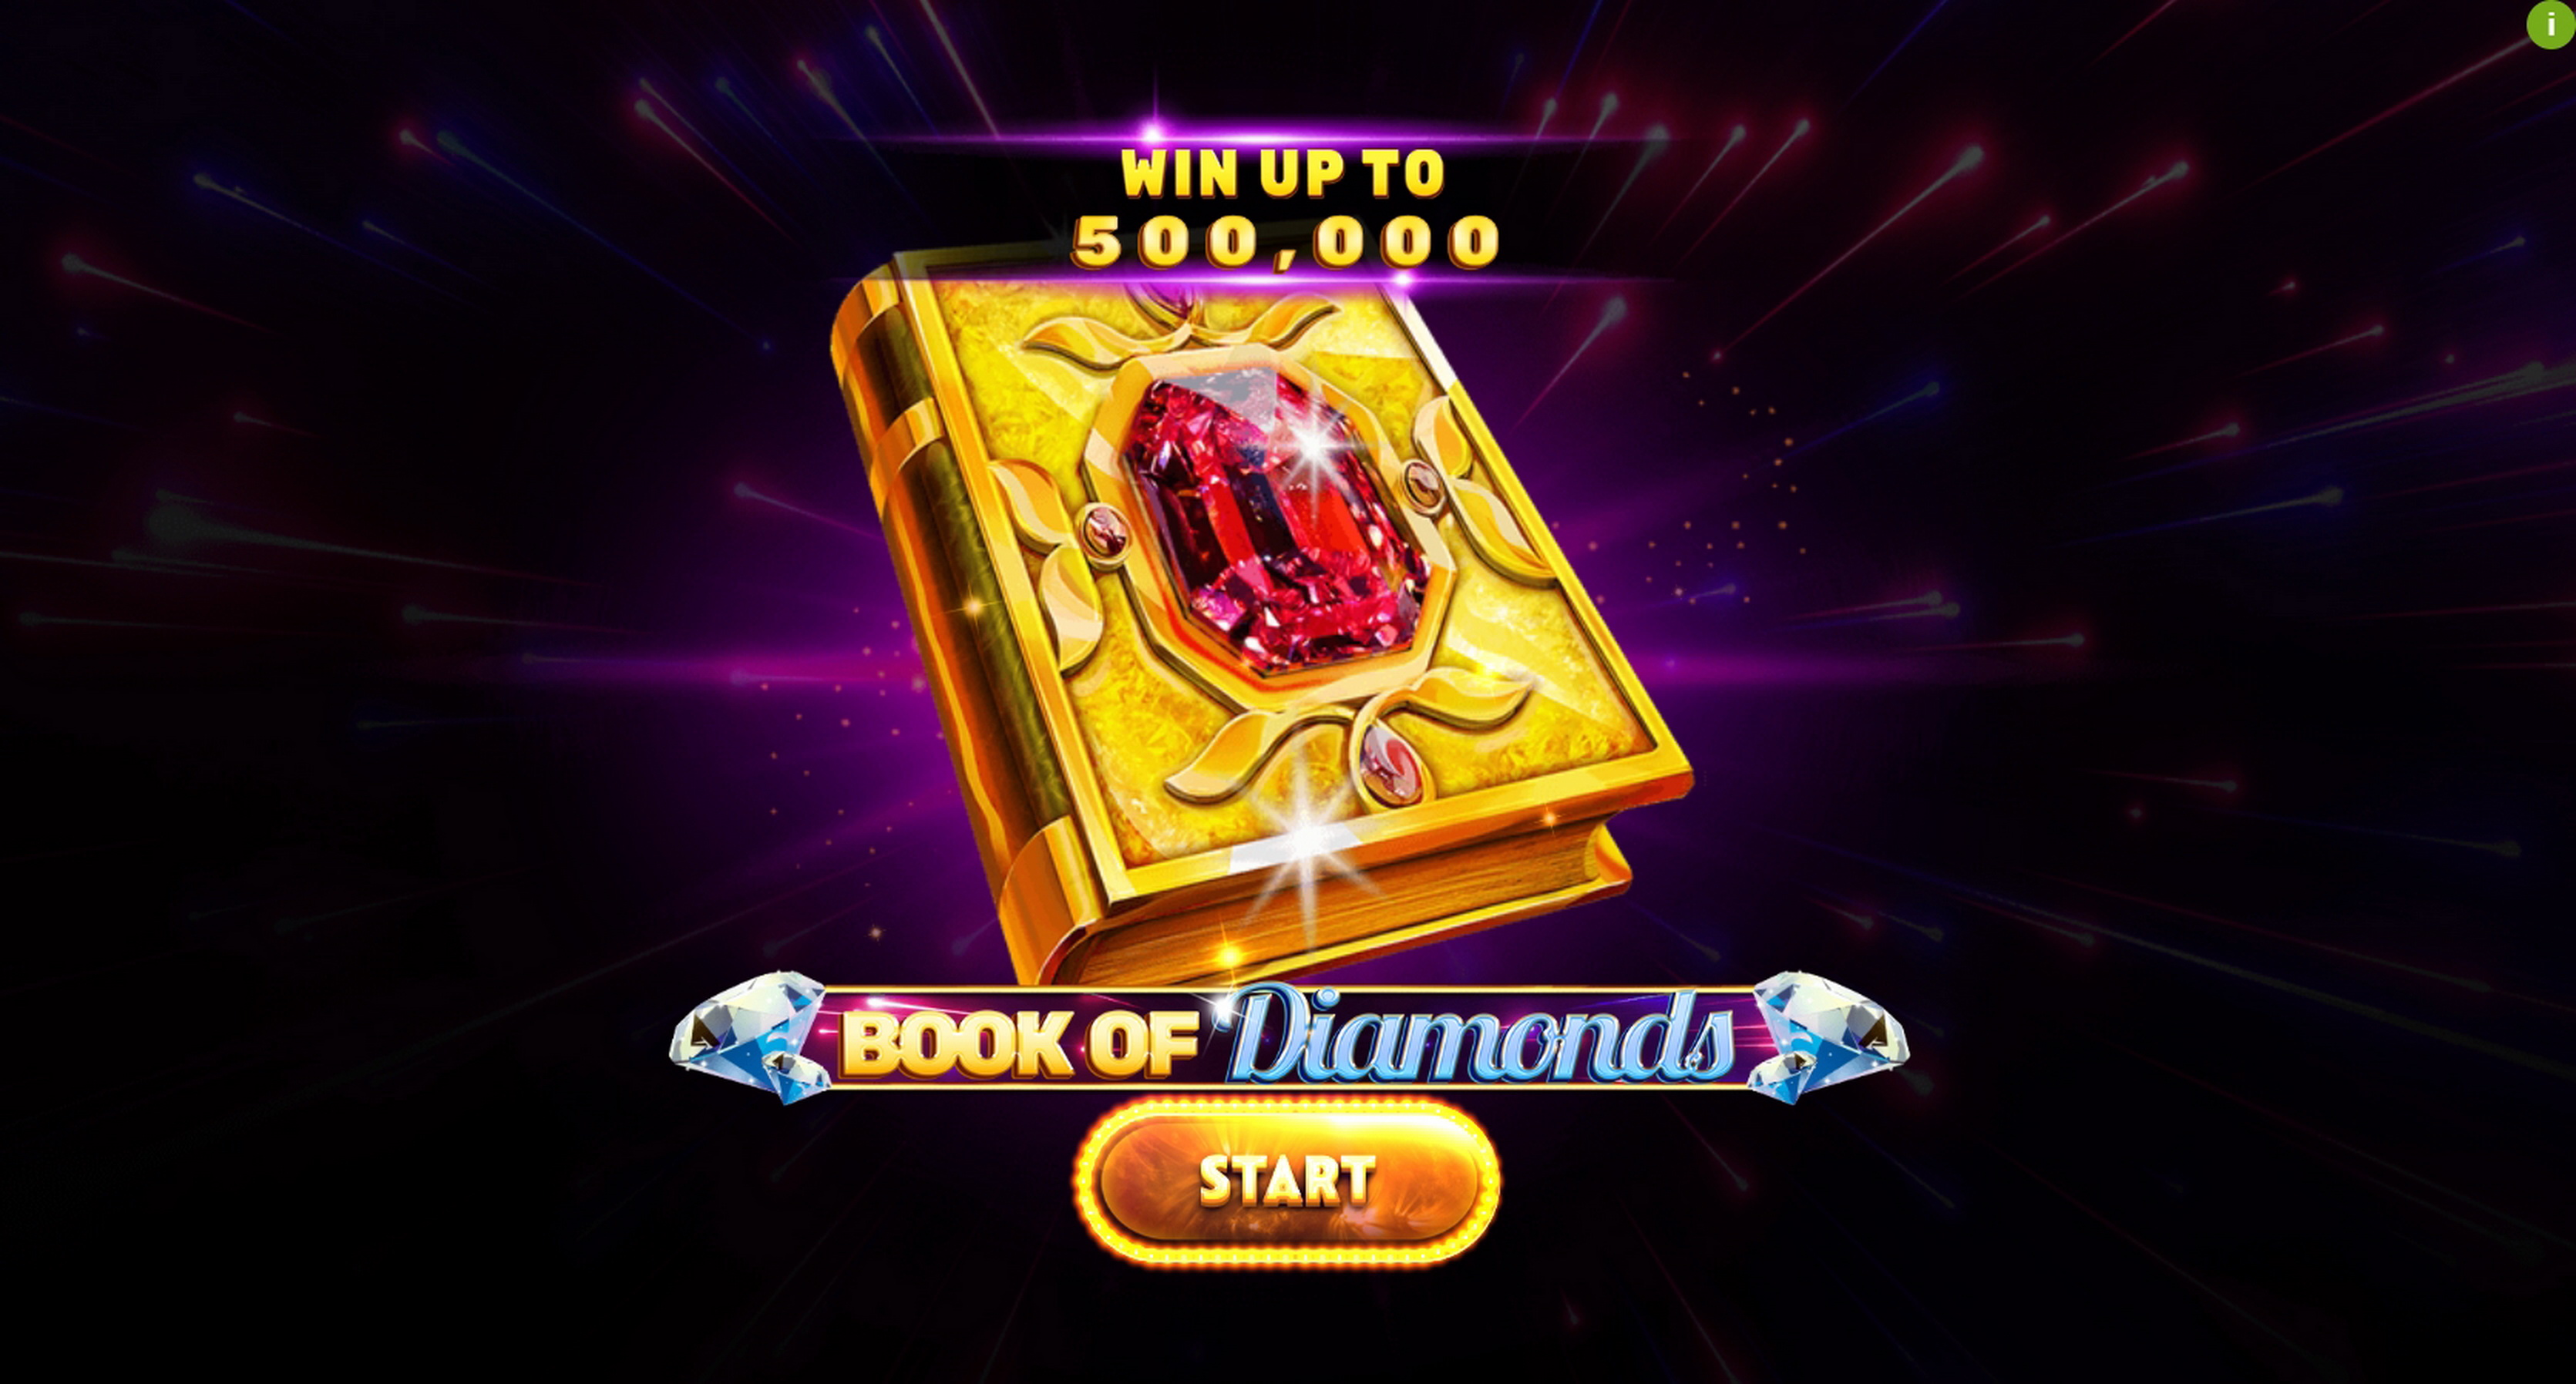 Play Book of Diamonds Free Casino Slot Game by Spinomenal